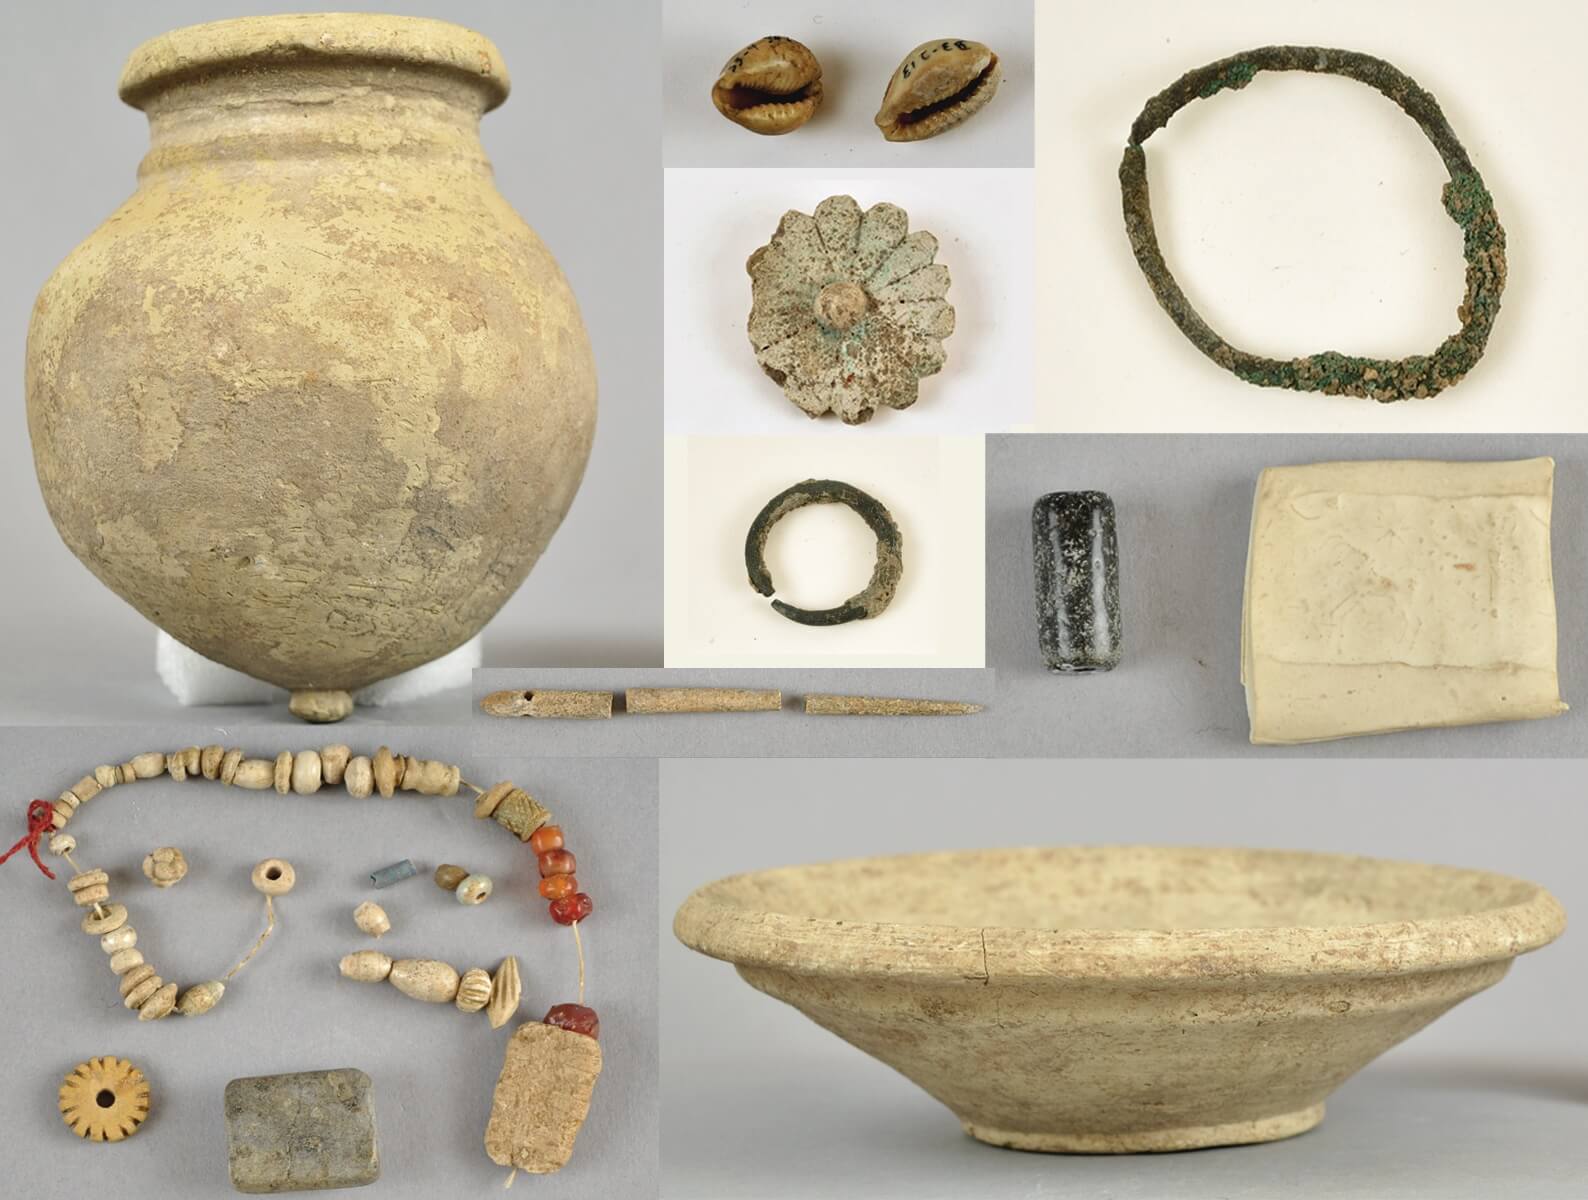 Examples of grave goods from Middle Assyrian Šibaniba in the collections of the Penn Museum (photos by the author). After the Middle Assyrian period, there was much less variety in the types of objects included in graves.